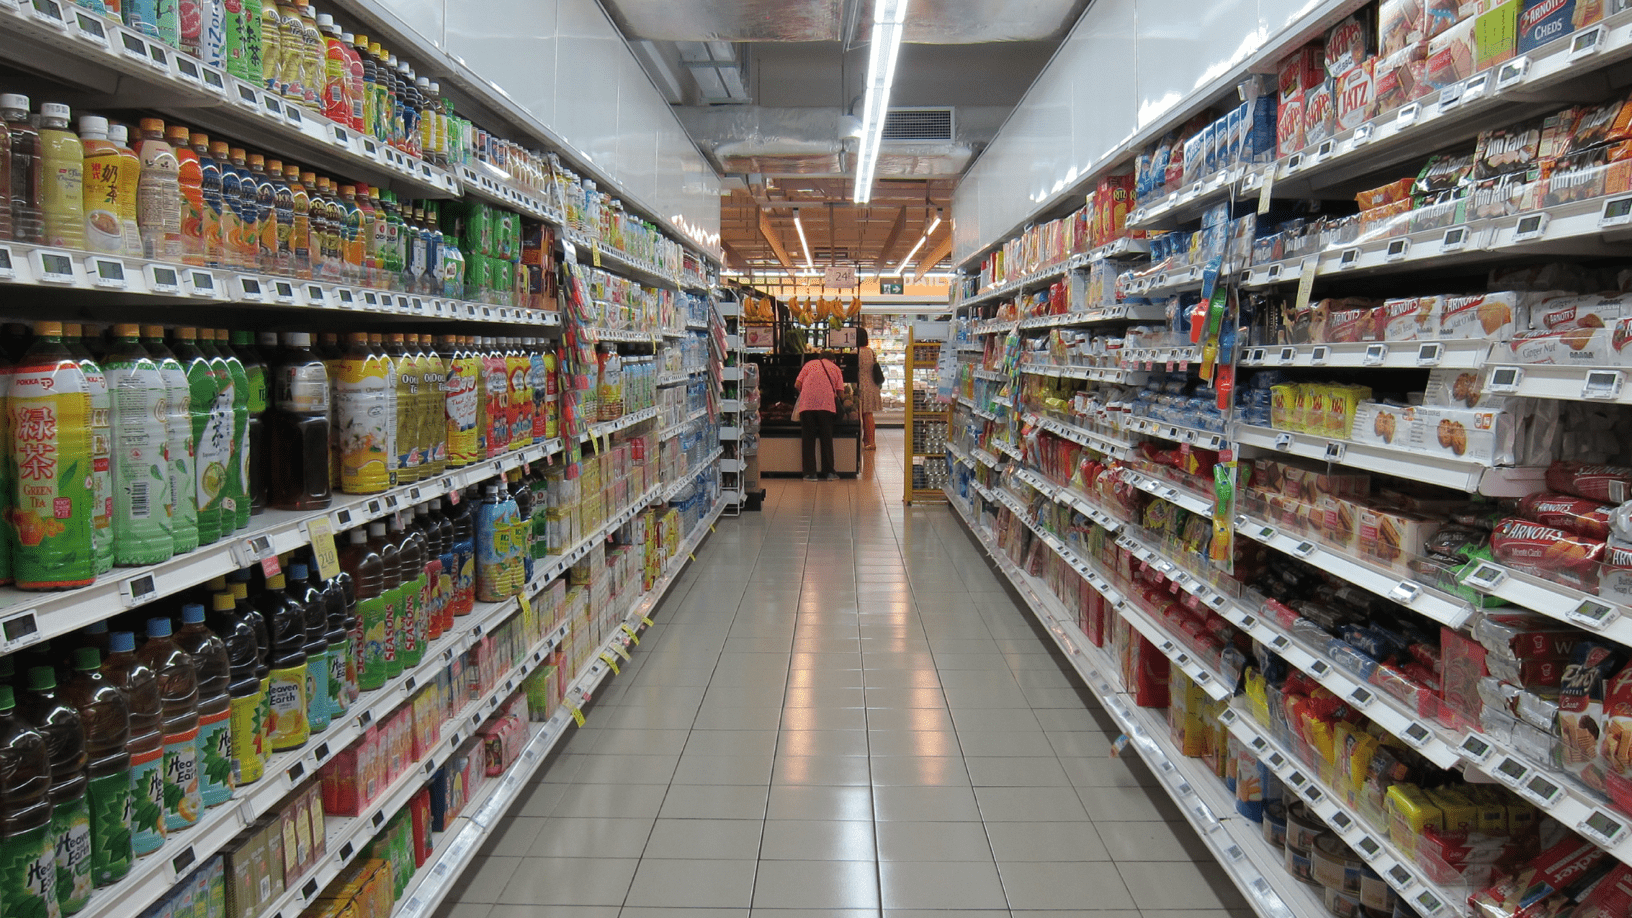 Aisles Of Food And Drink